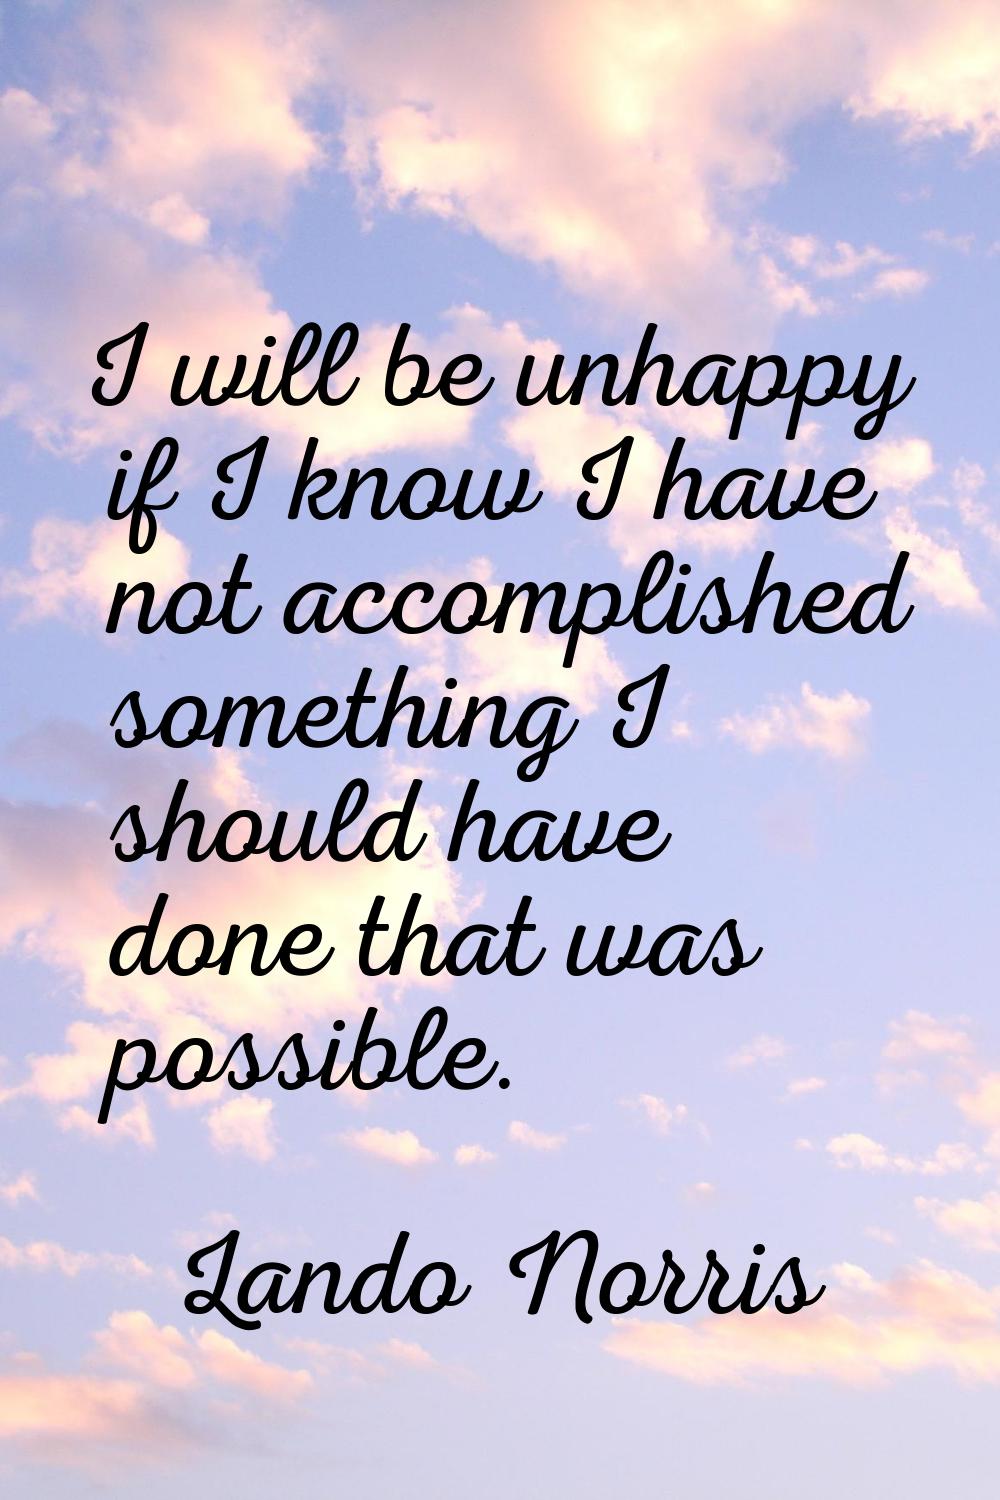 I will be unhappy if I know I have not accomplished something I should have done that was possible.